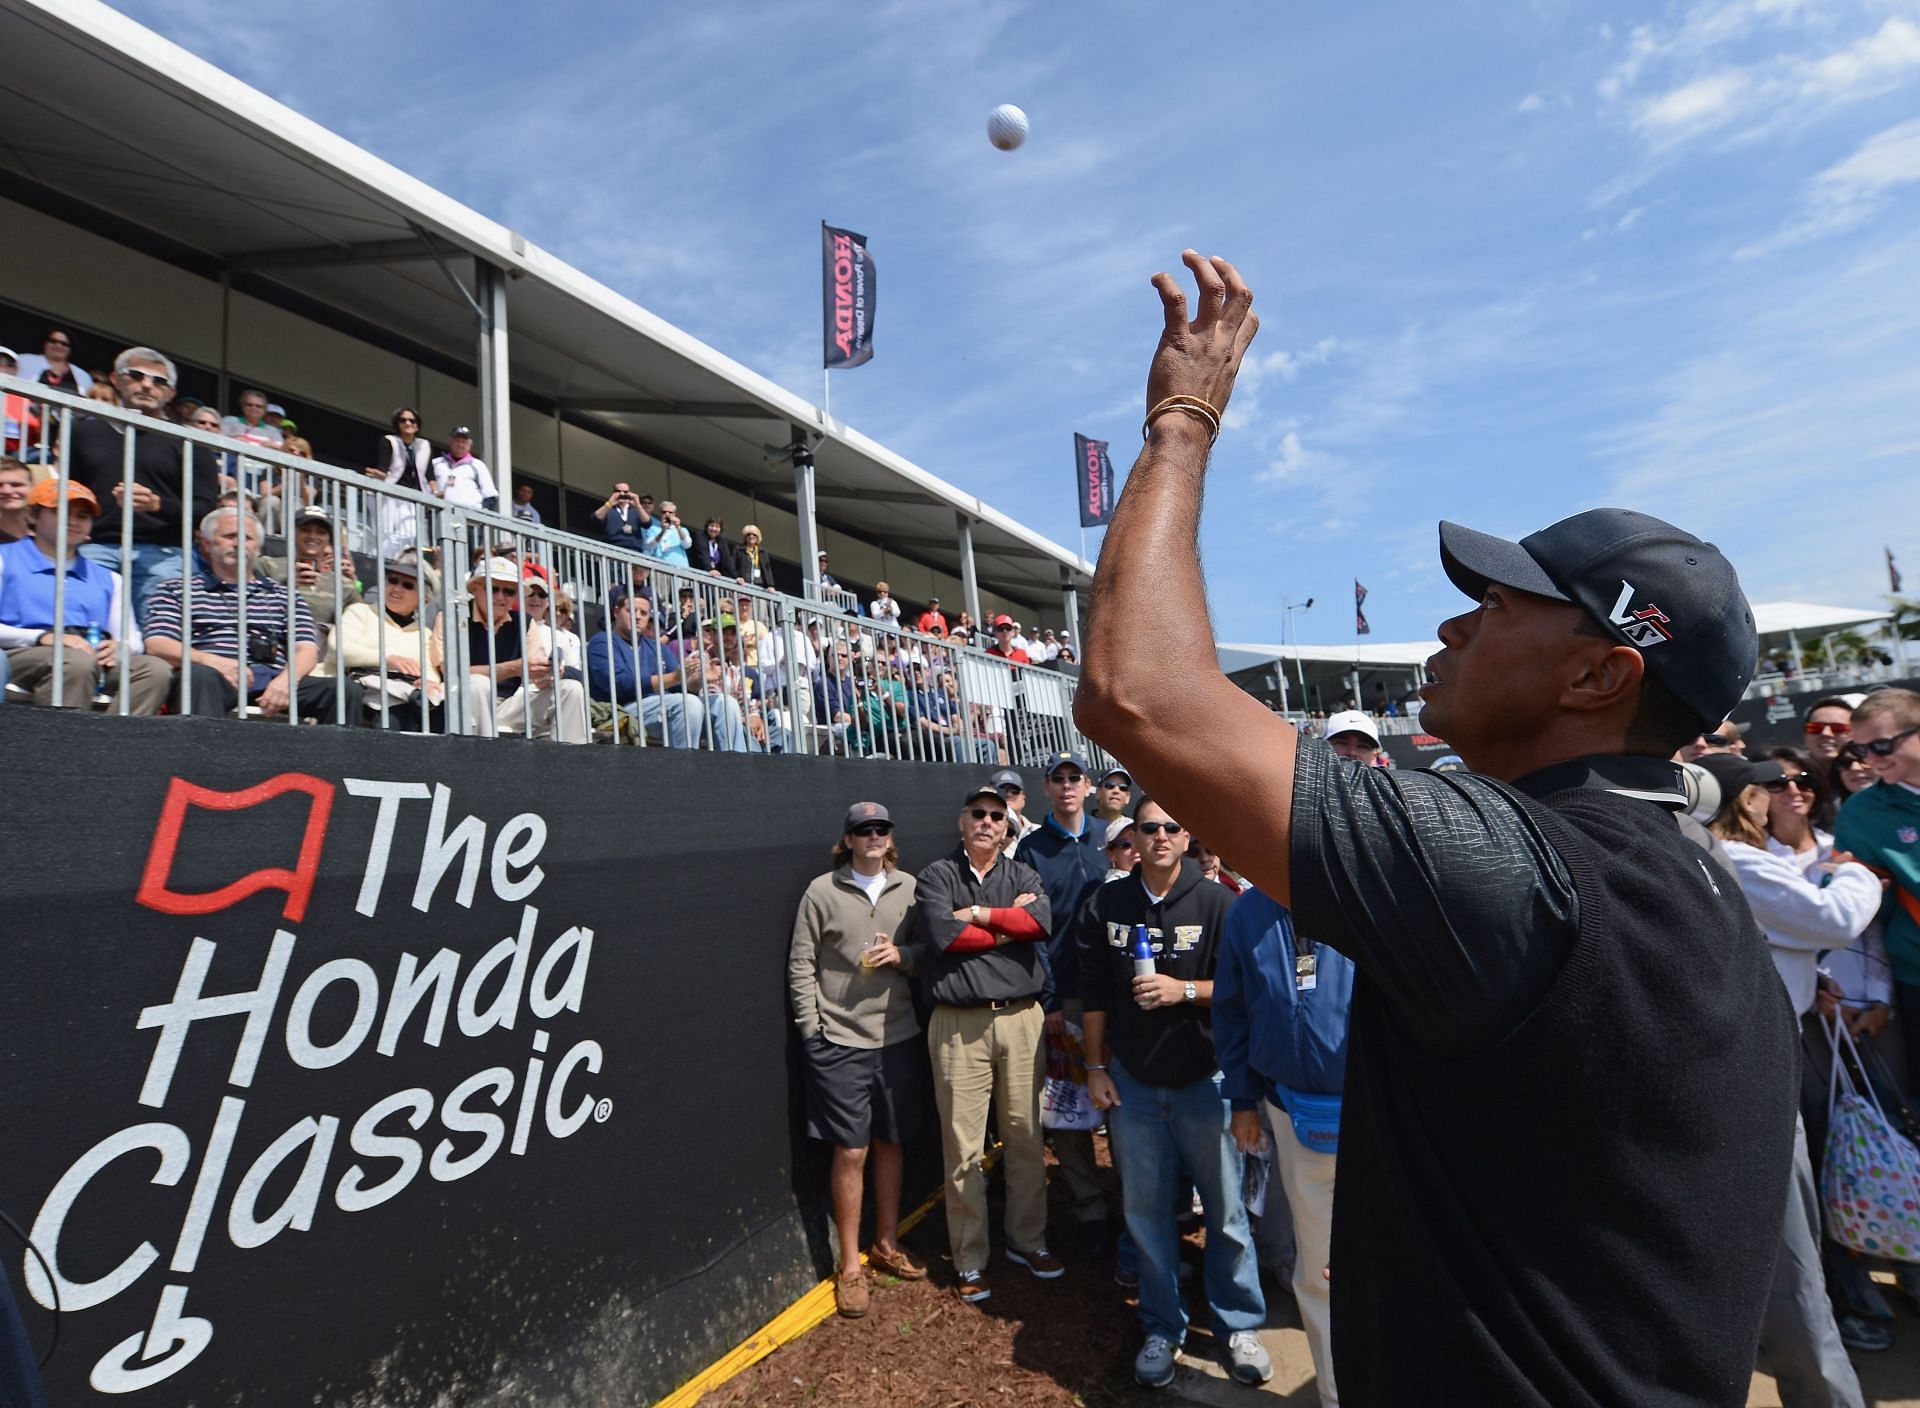 Tiger Woods at the Honda Classic in 2013